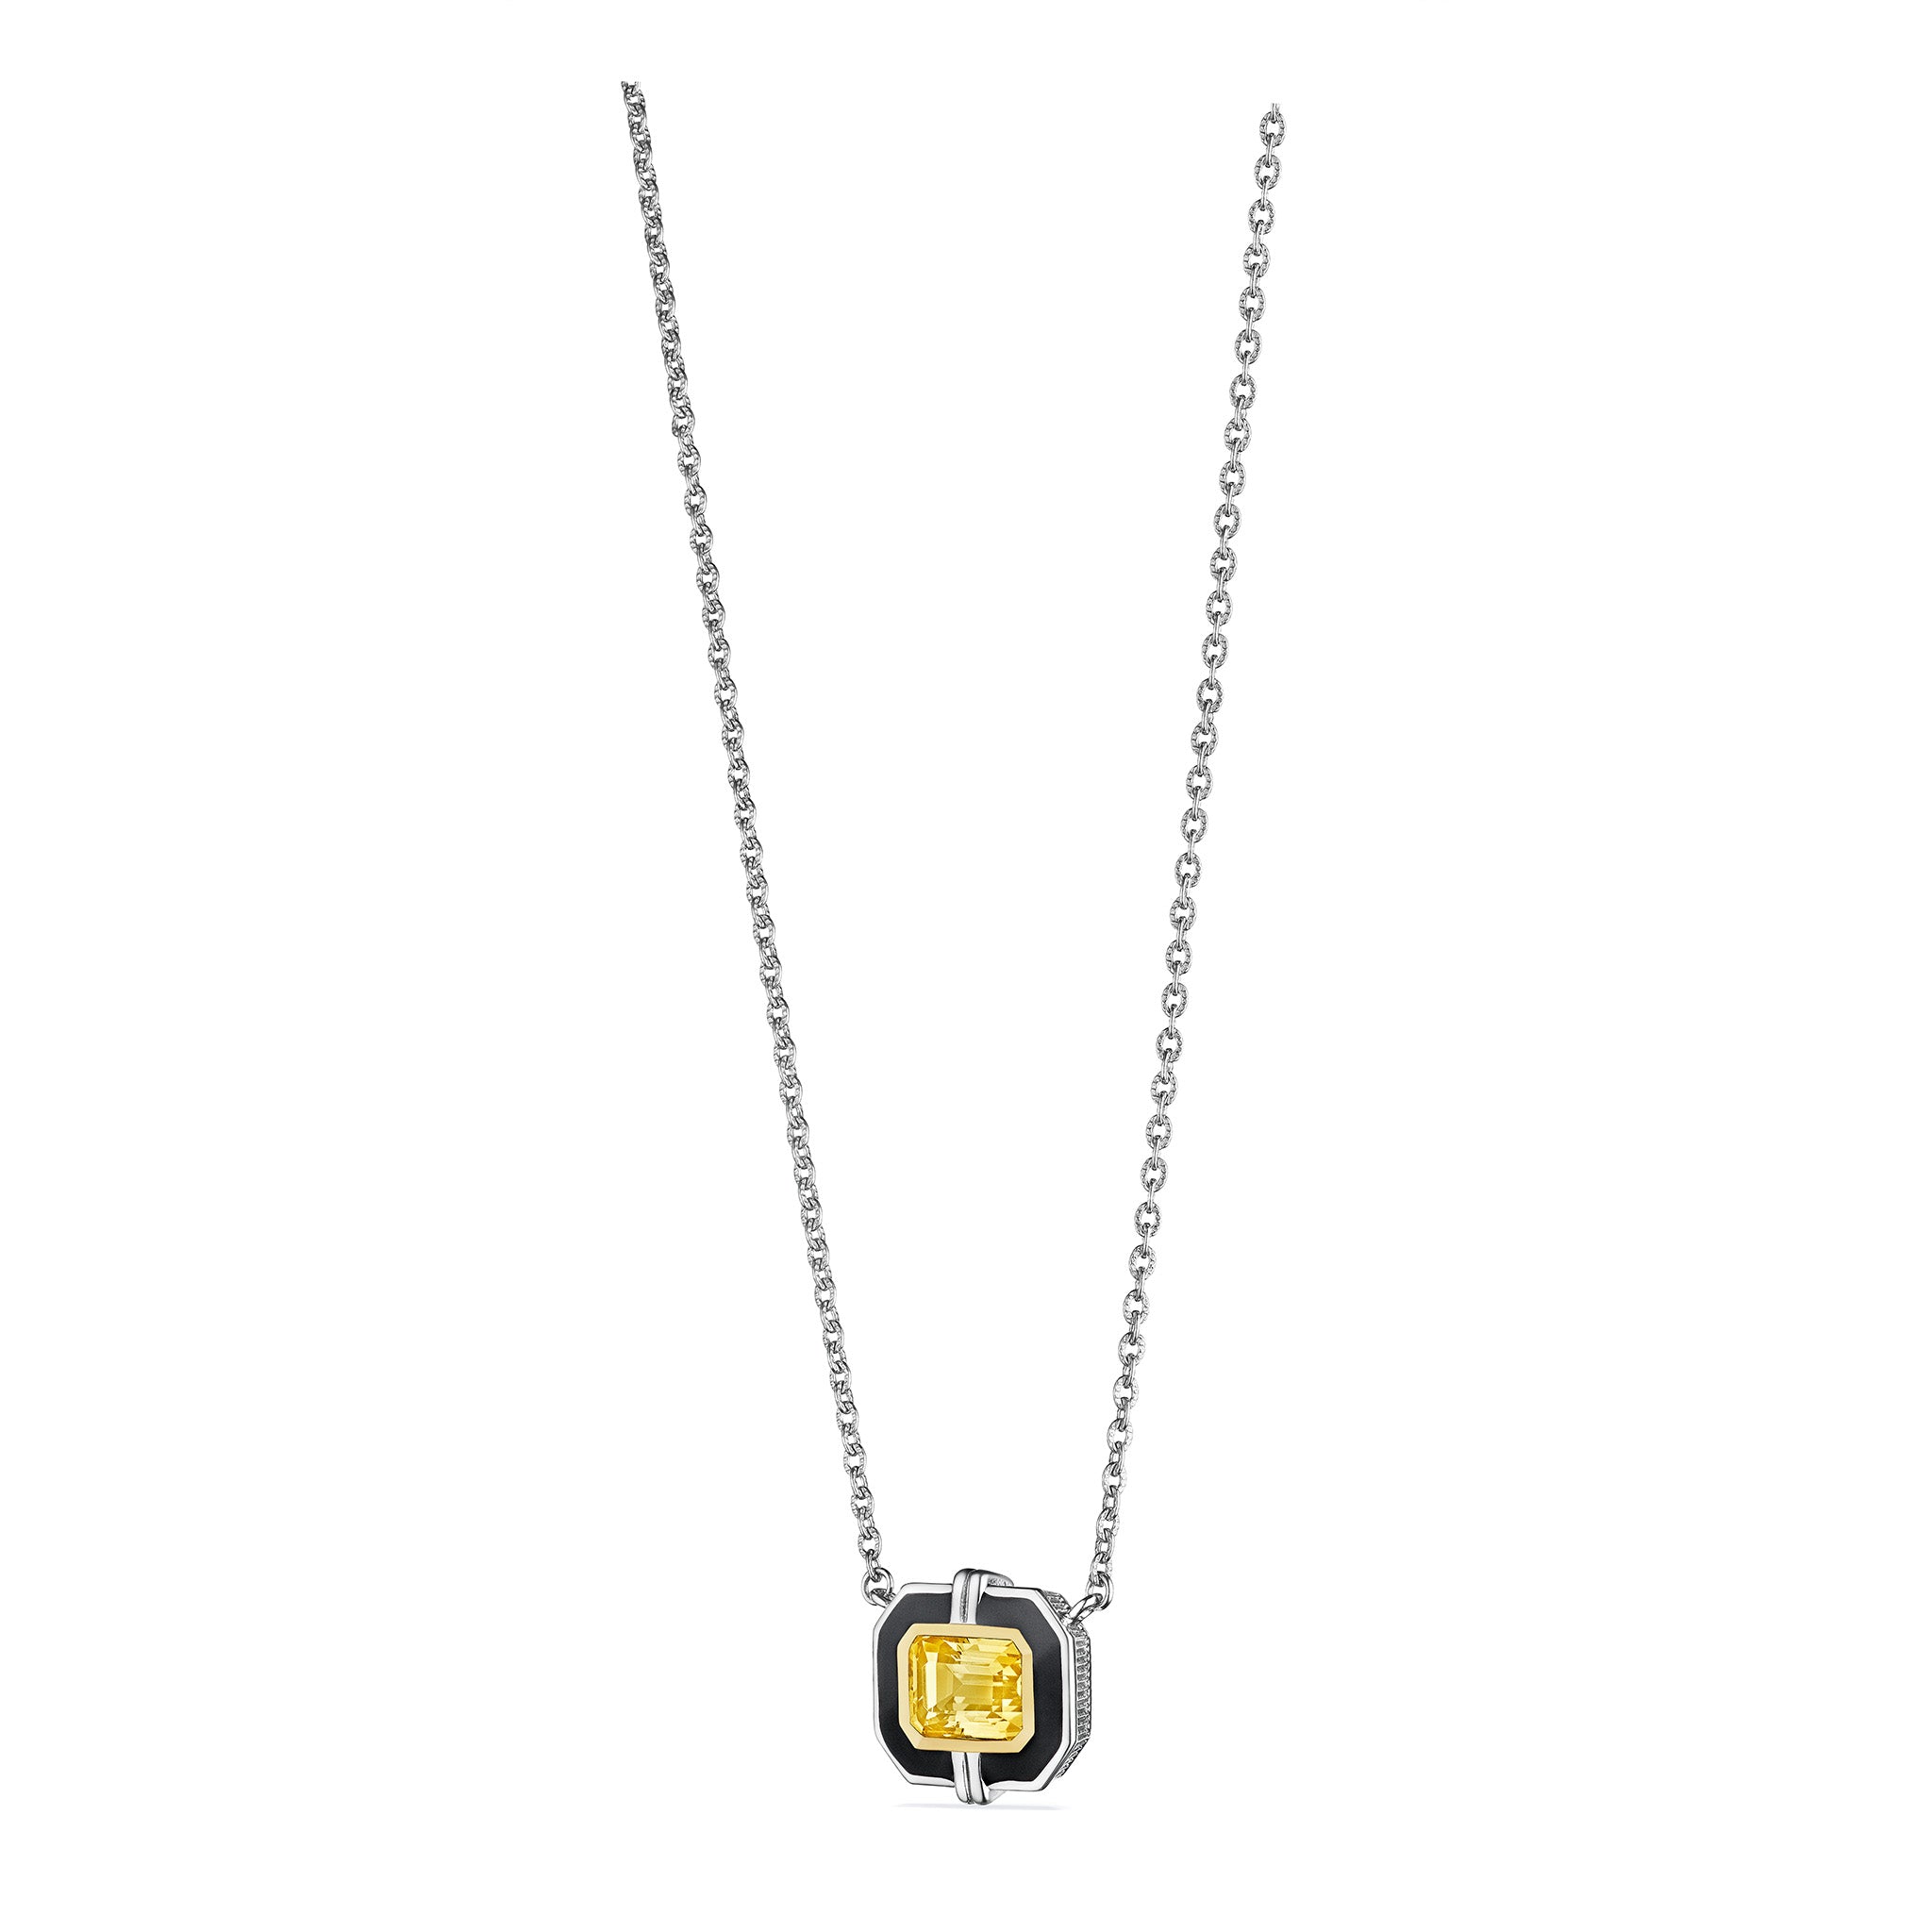 Adrienne Necklace with Enamel, Champagne Citrine and 18K Gold